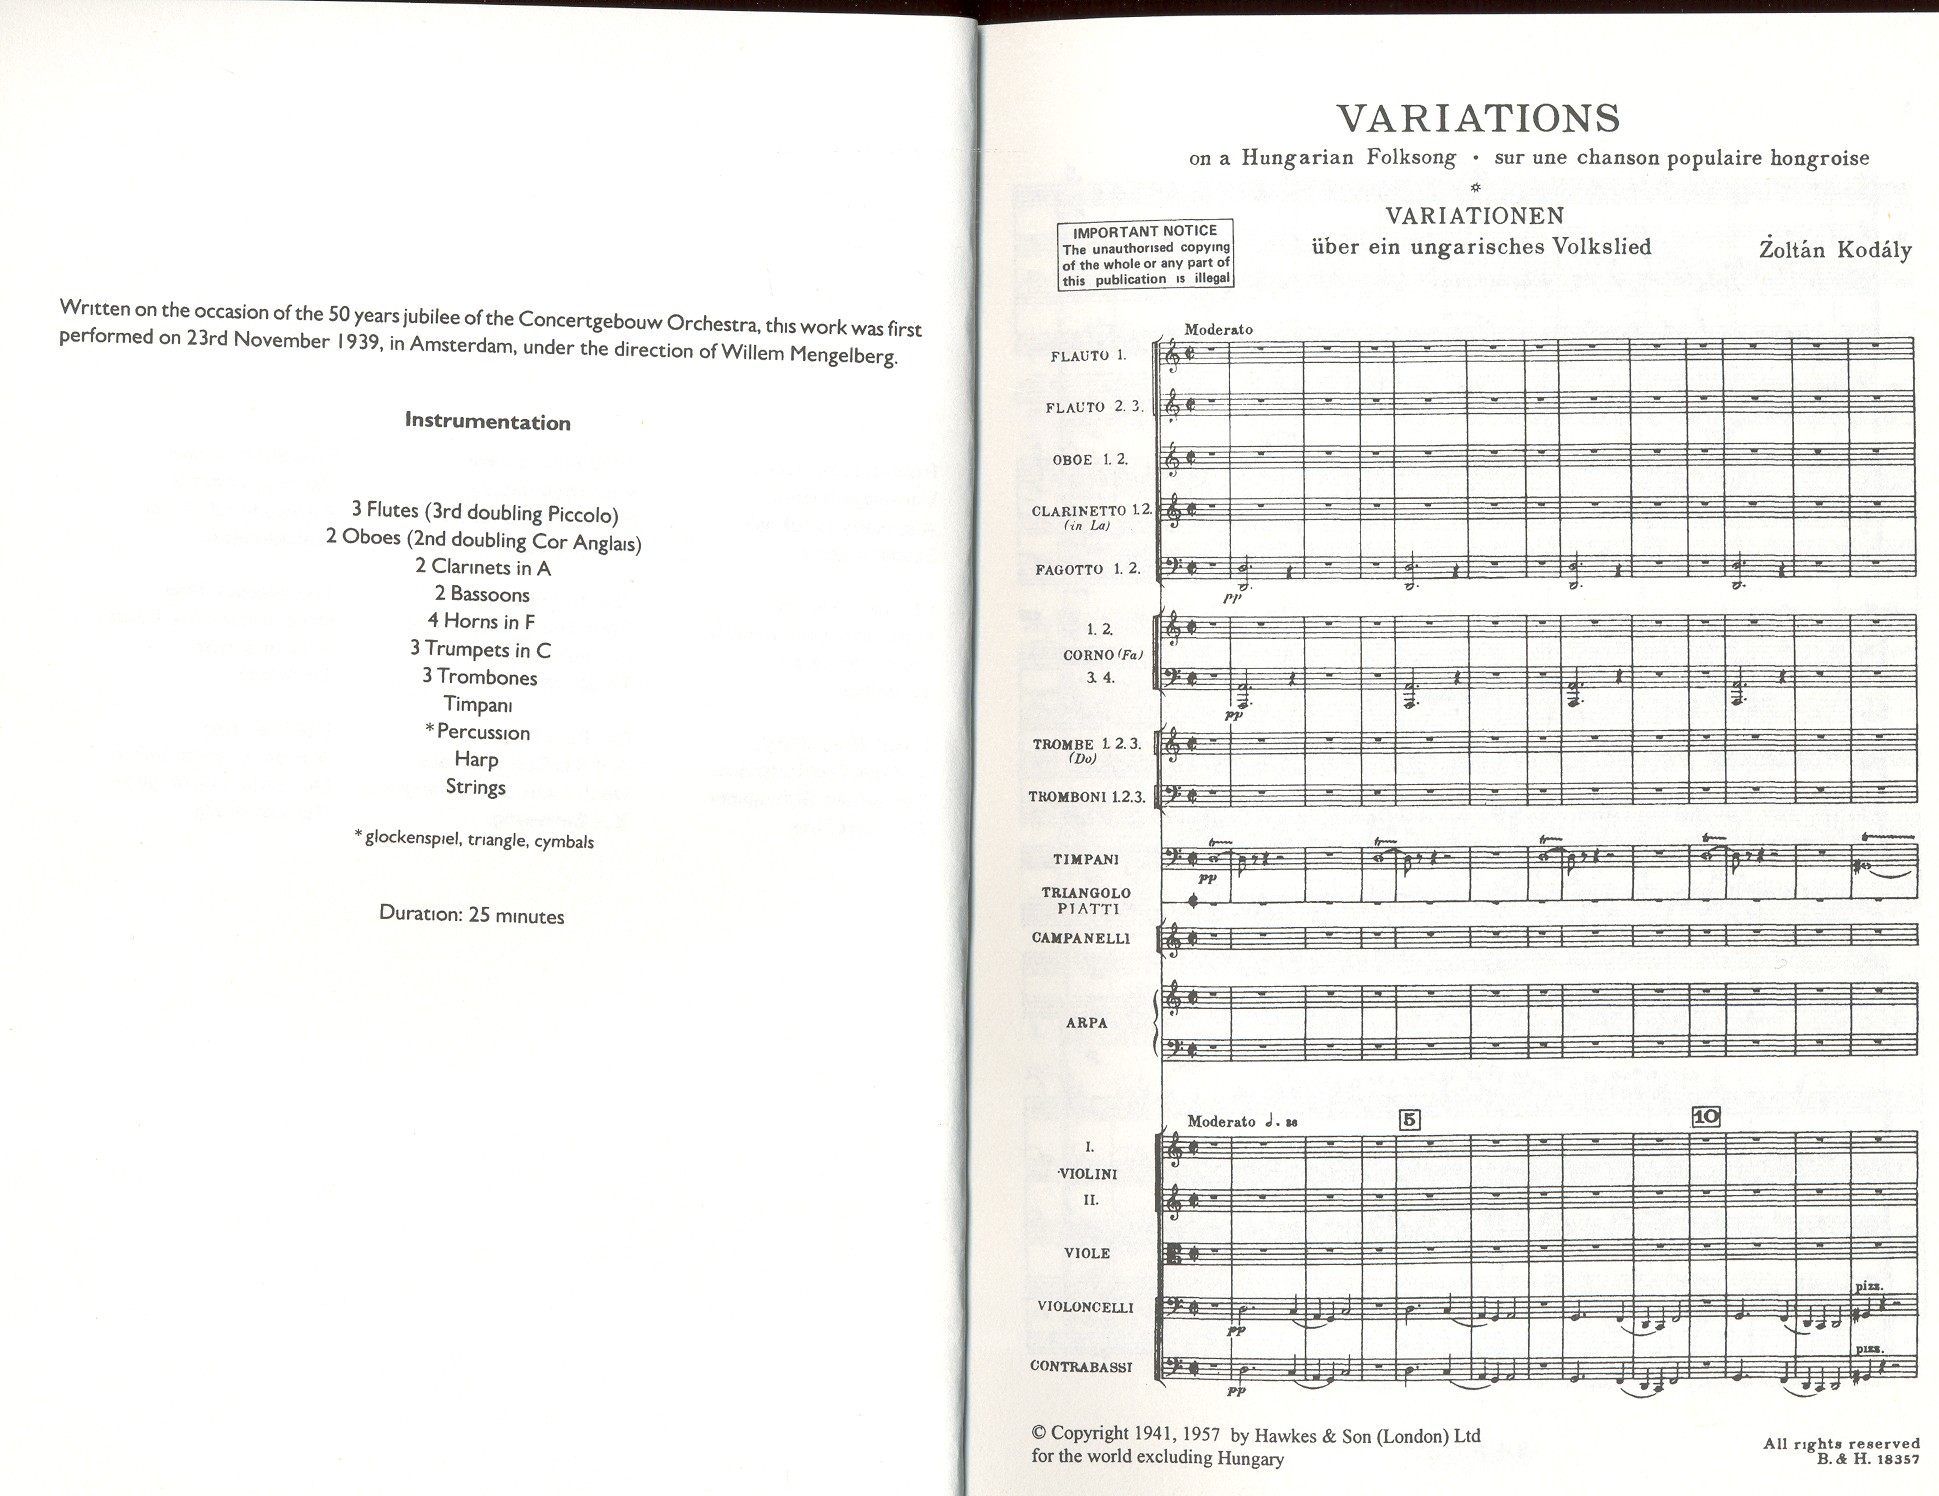 Variatons on a hungarian Folksong